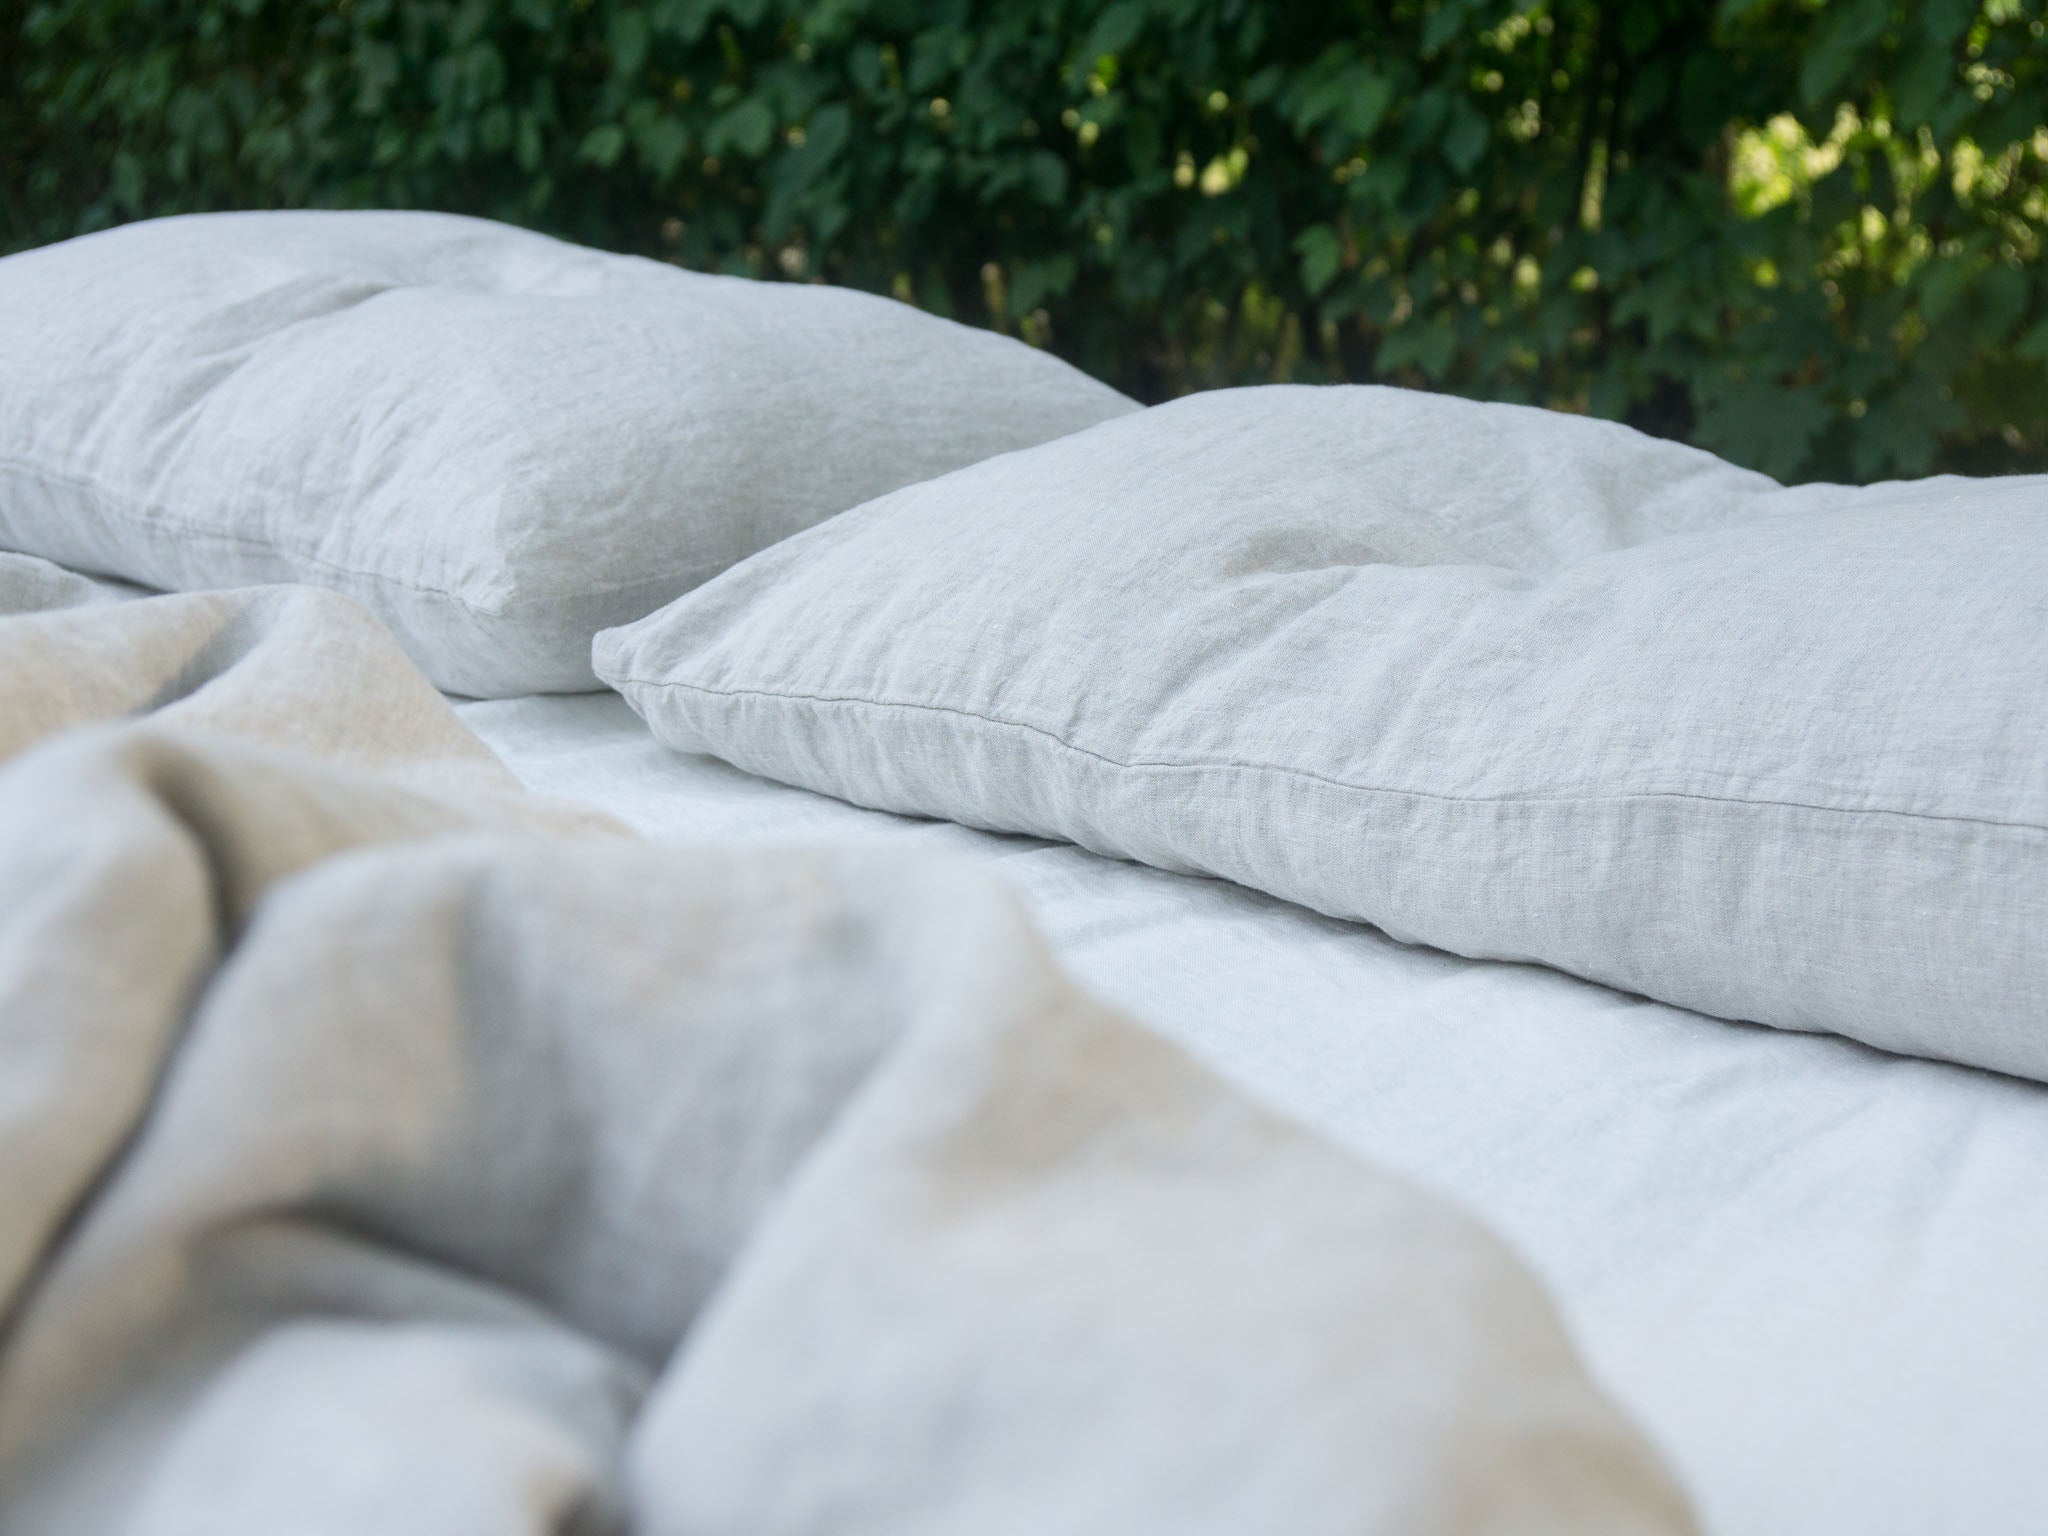 Pure Washed Linen Bedding on Made Bed Outdoors